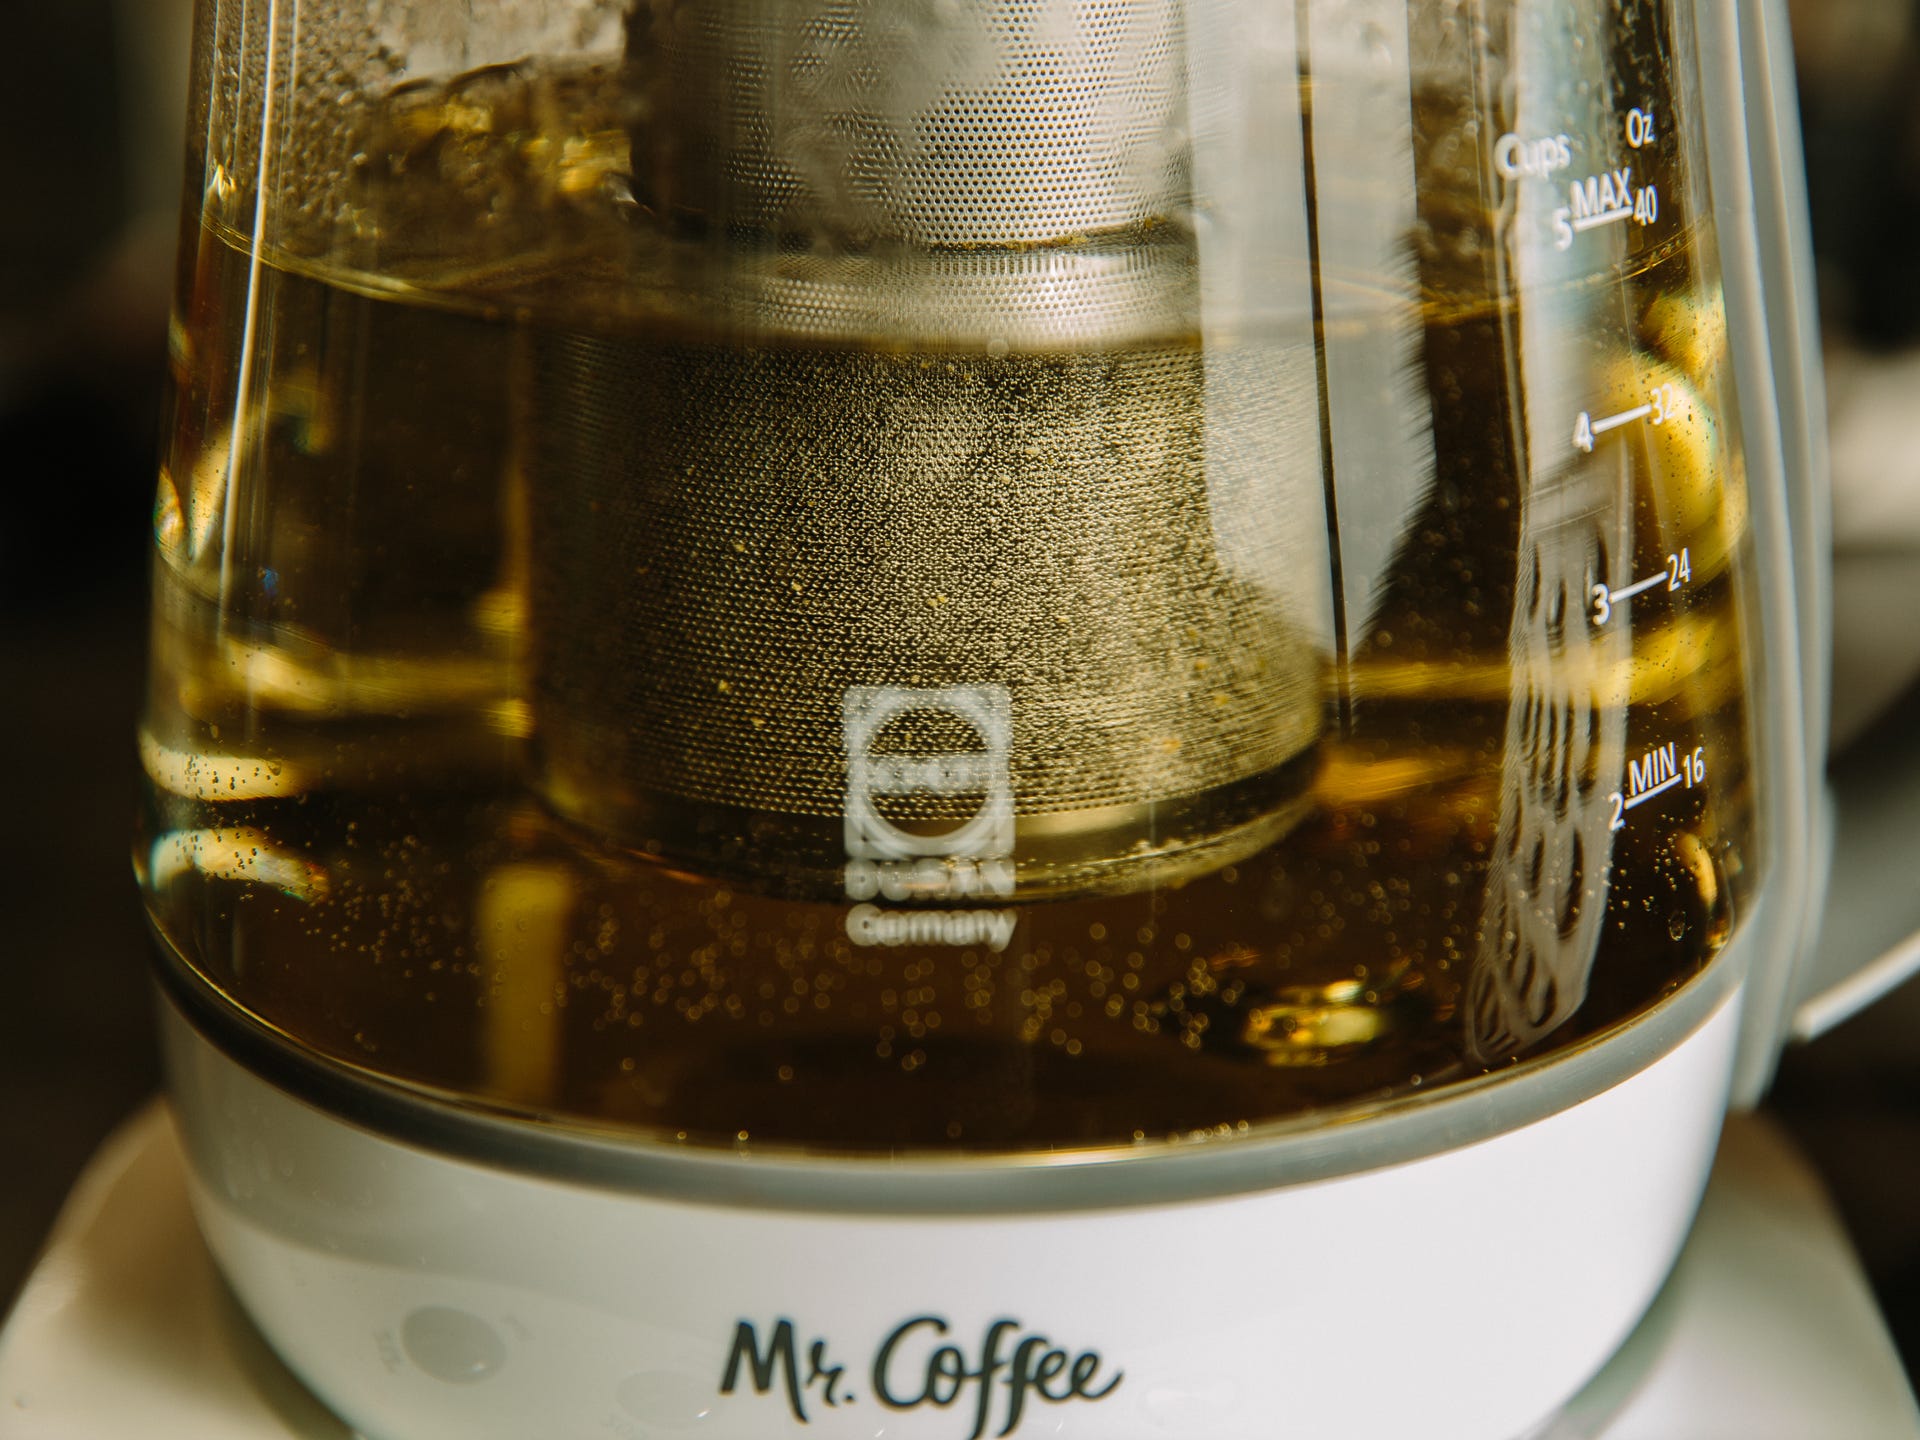 Mr. Coffee Tea Maker and Kettle review: With its steep timer and brewing  modes, this is no basic tea kettle - CNET